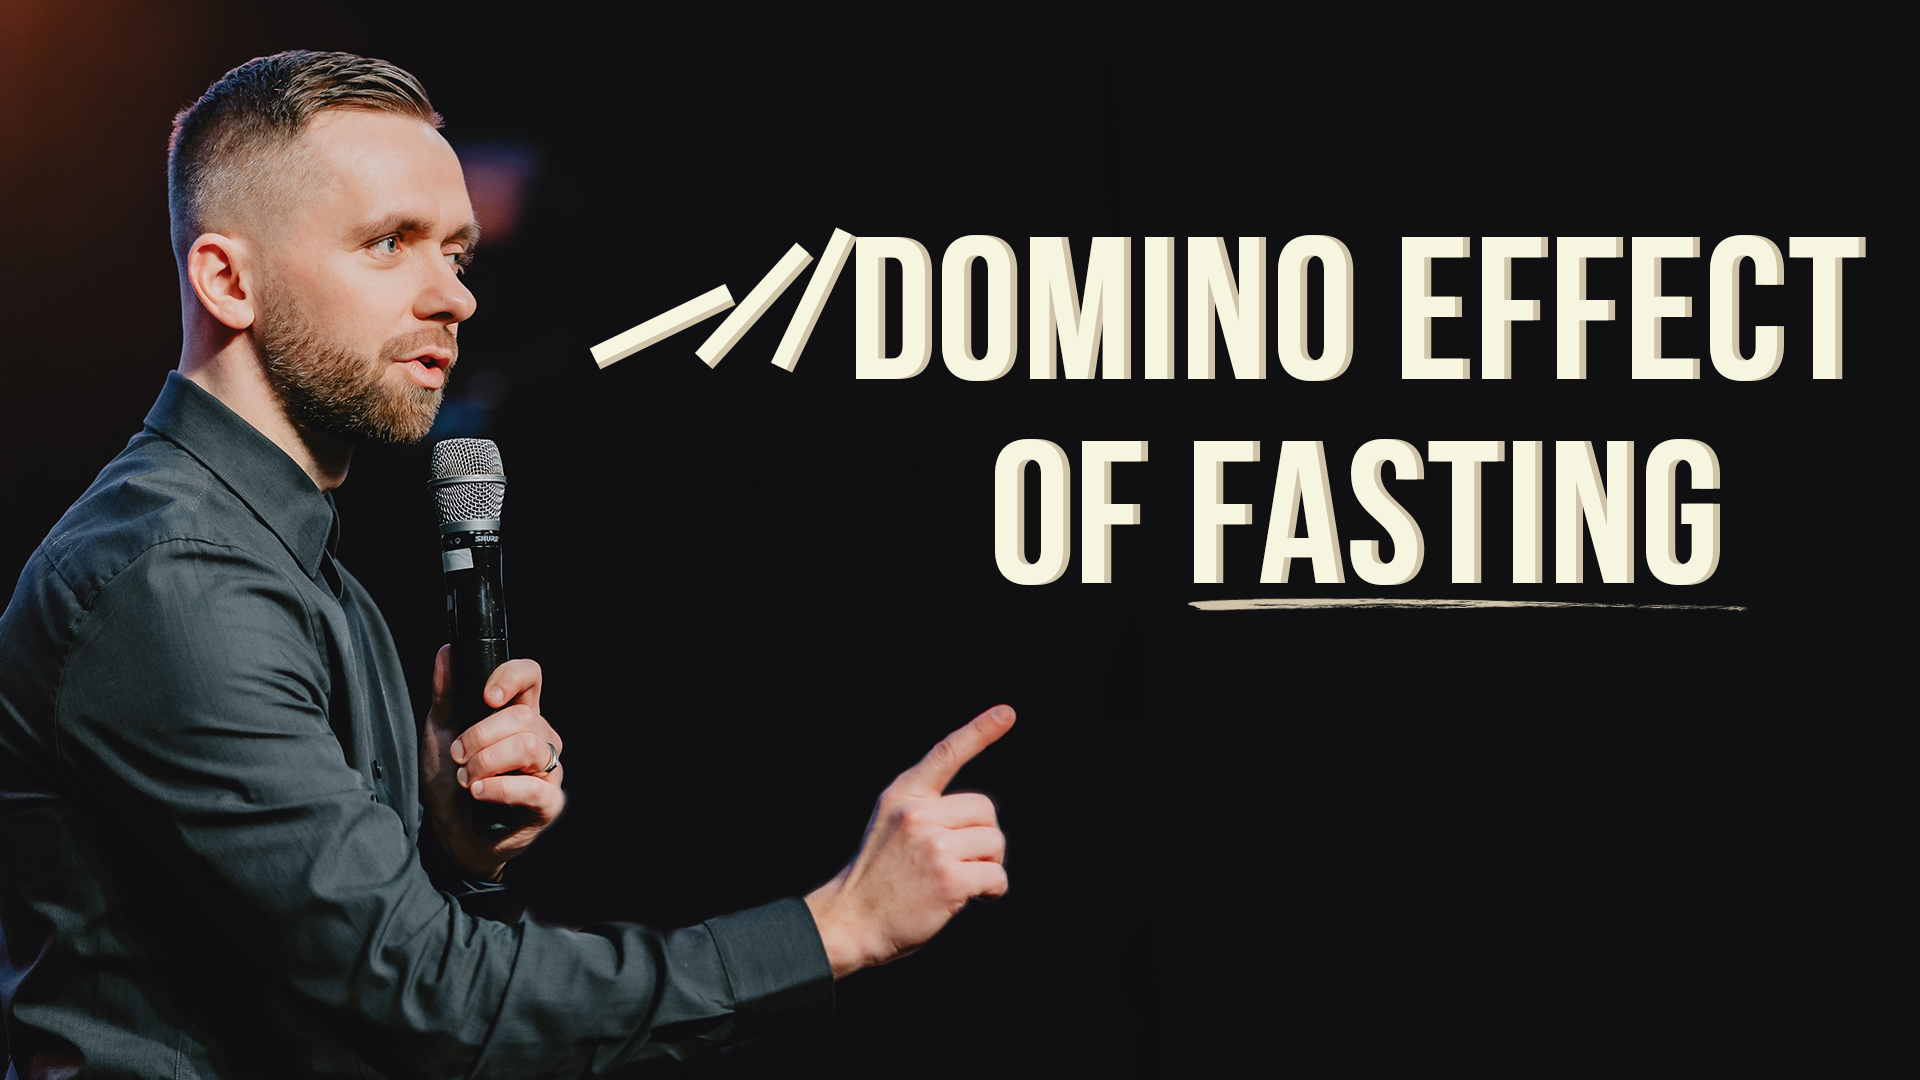 Featured Image for “Domino Effect of Fasting”